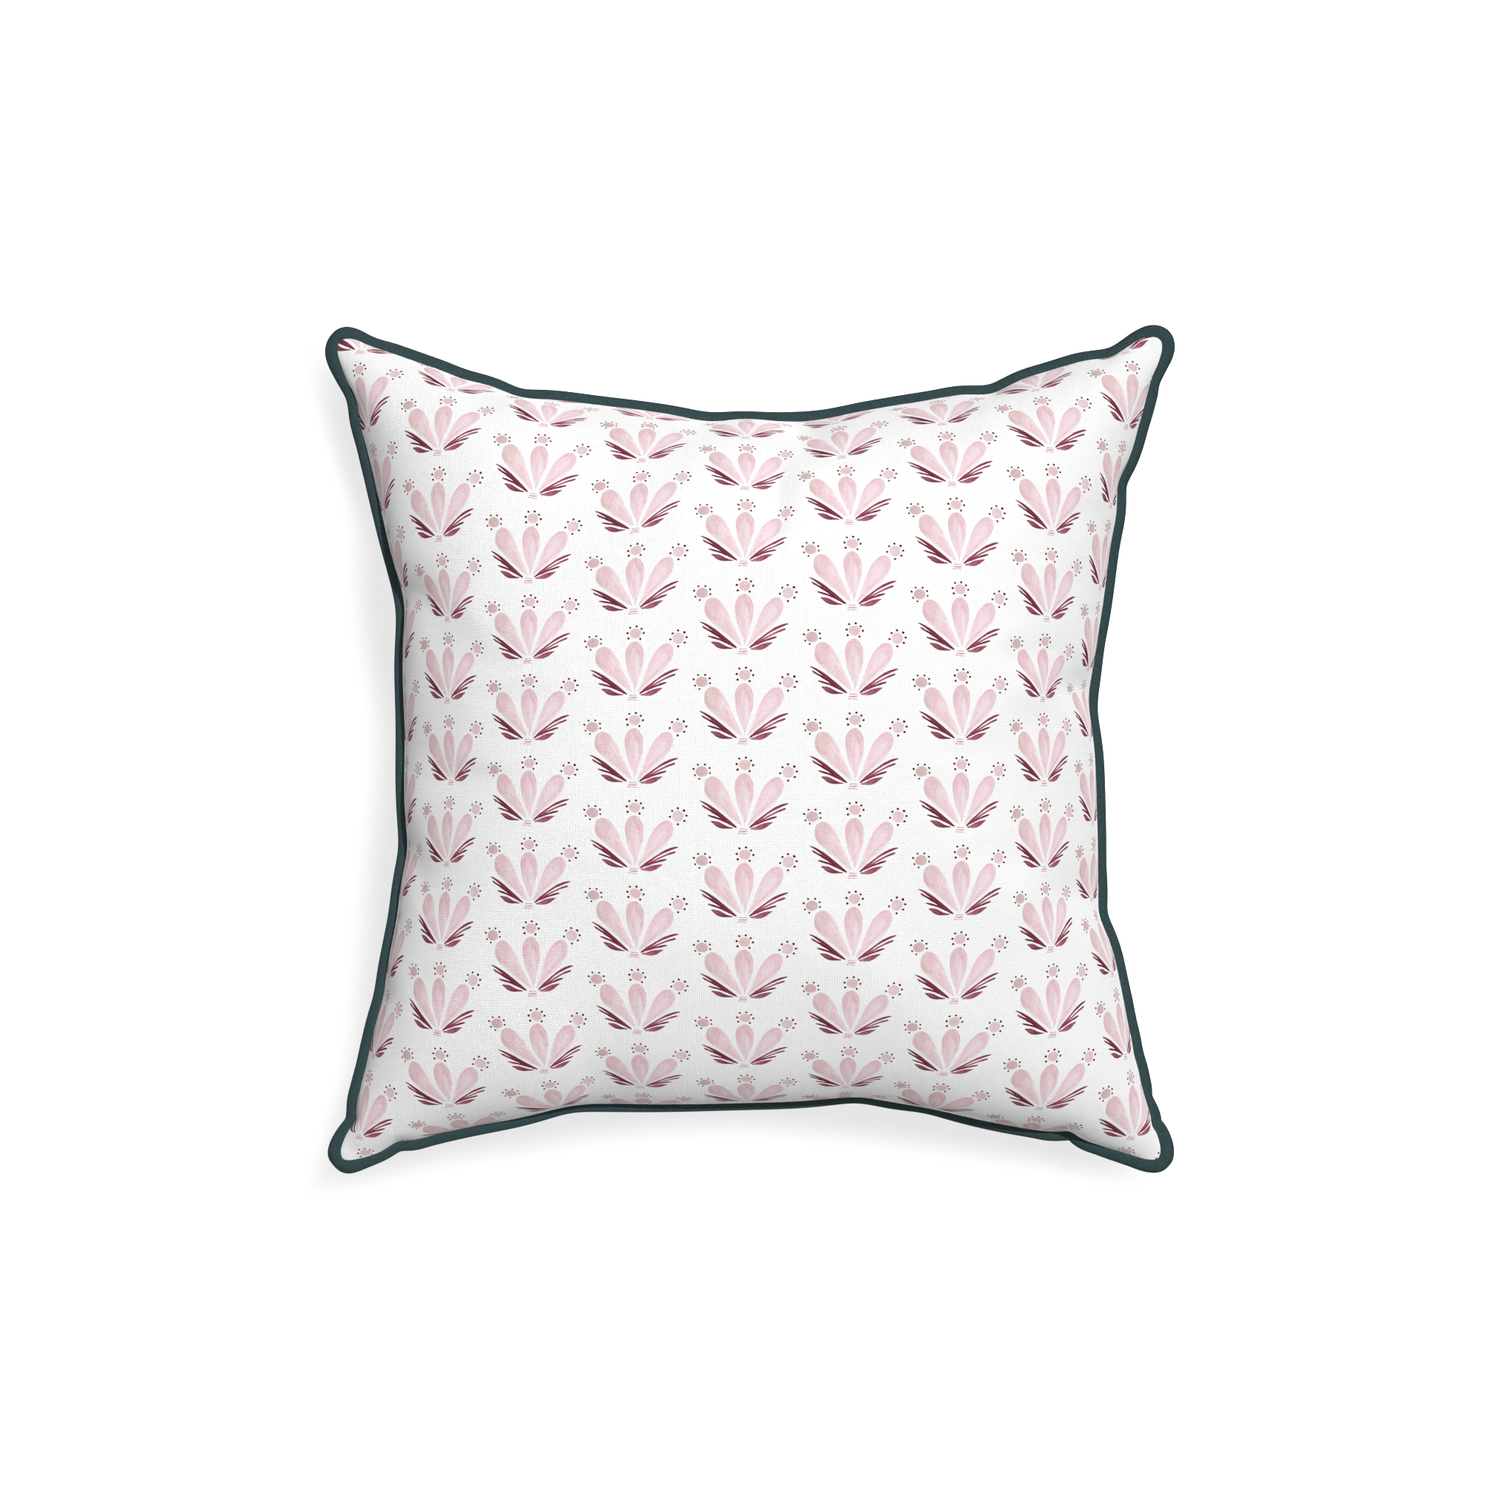 18-square serena pink custom pink & burgundy drop repeat floralpillow with p piping on white background